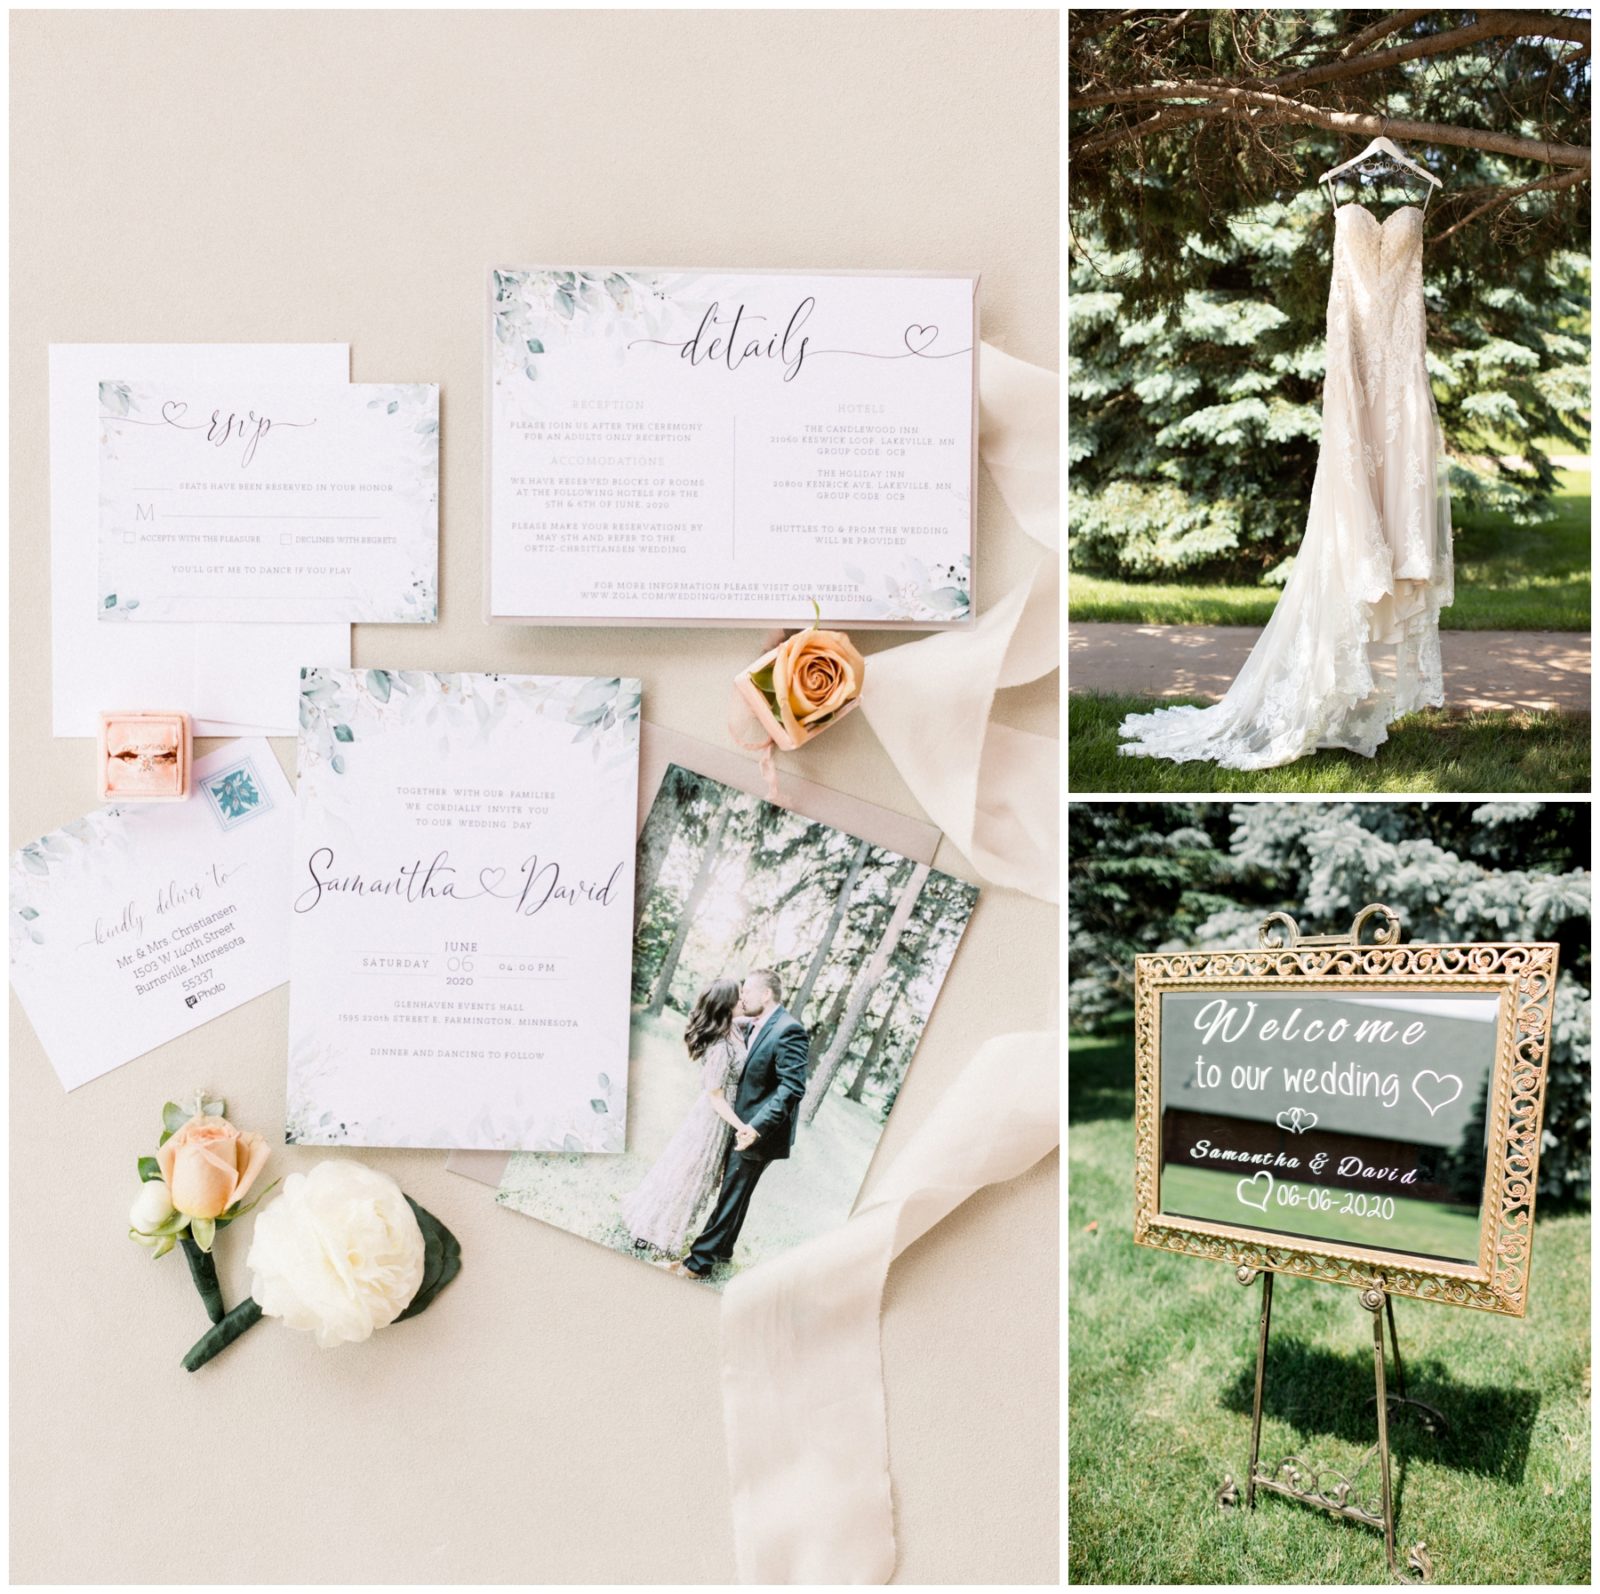 Compilation of photos showing wedidng details such as invitations, wedding dress and welcome sign with writings.